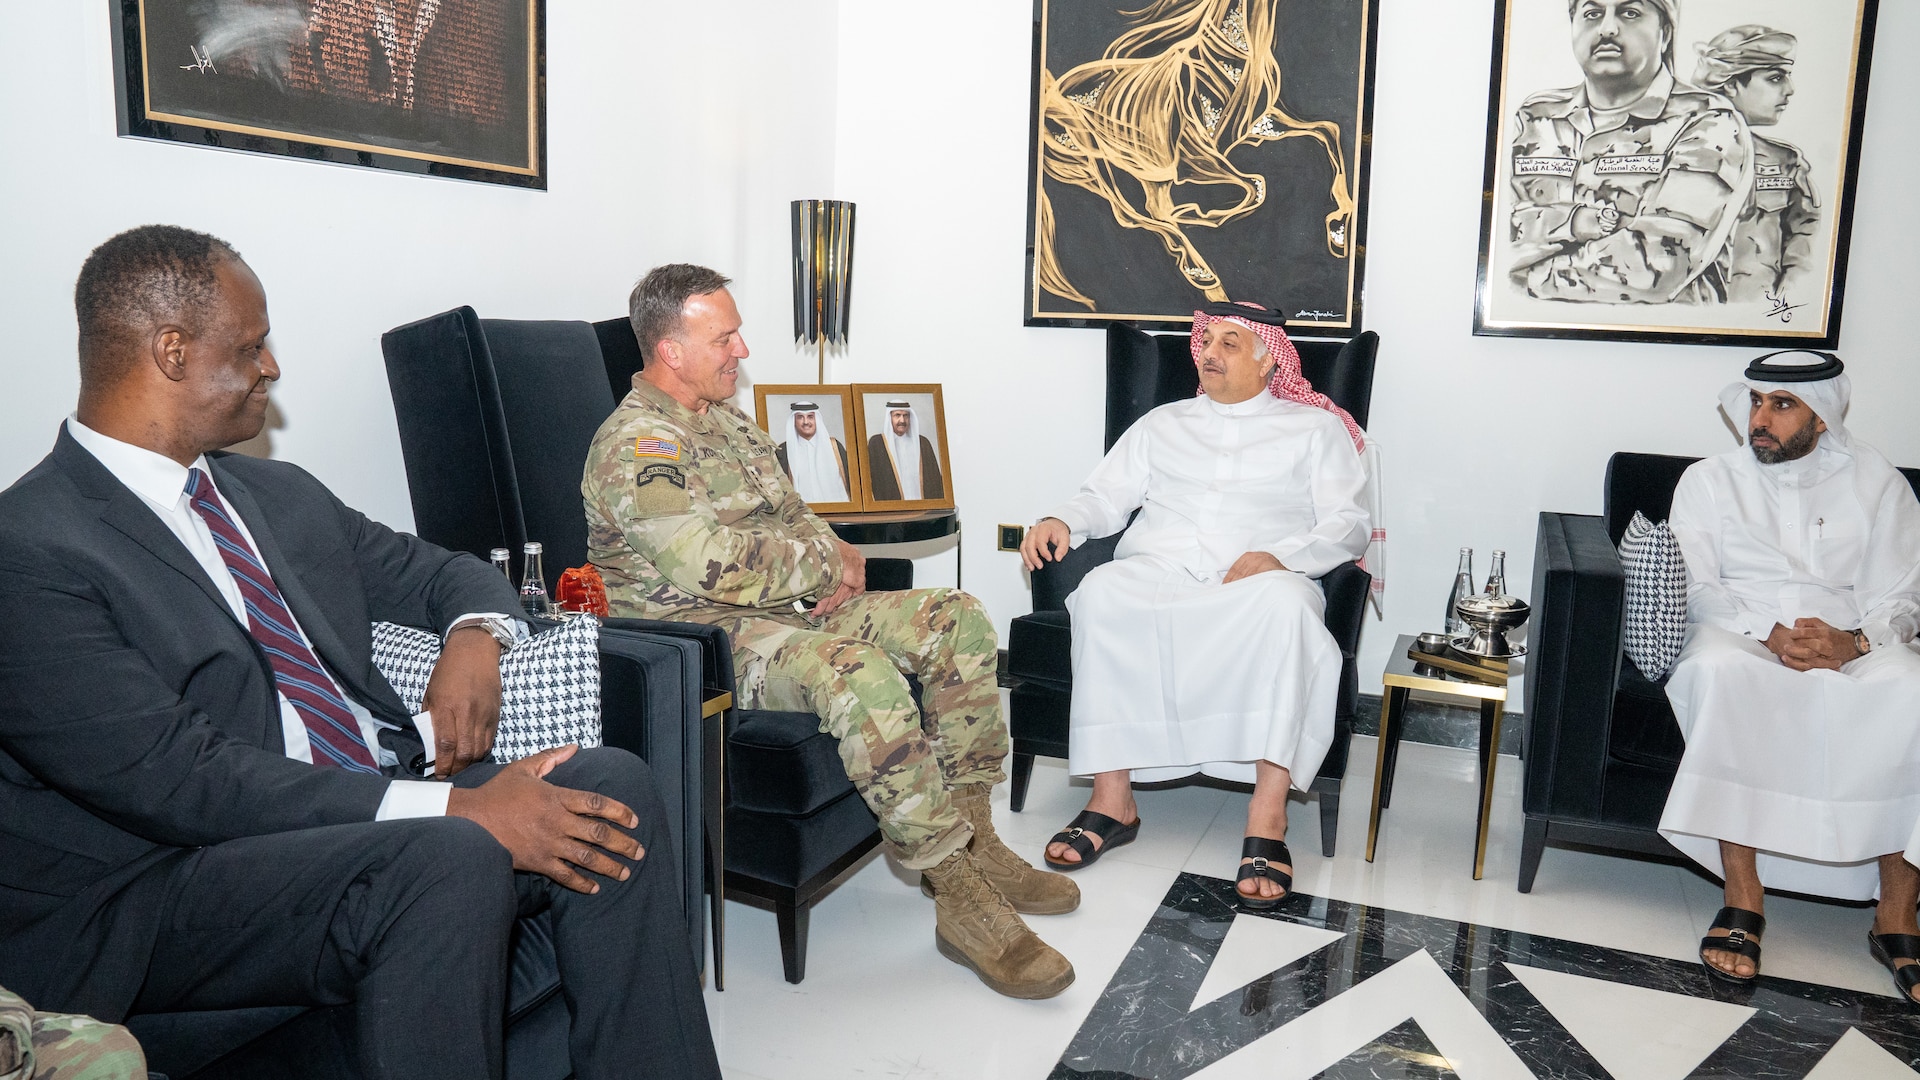 October 23rd: Doha - The Honorable Timmy T. Davis, US Ambassador to Qatar, and General Kurilla meet with Qatar Minister of State for Defense Affairs, His Excellency Dr. Khalid bin Mohamed Al Attiyah and the Head of International Military Cooperation Authority for the Qatar Armed Forces, Brigadier General Abdulaziz Saleh Al-Sulaiti.